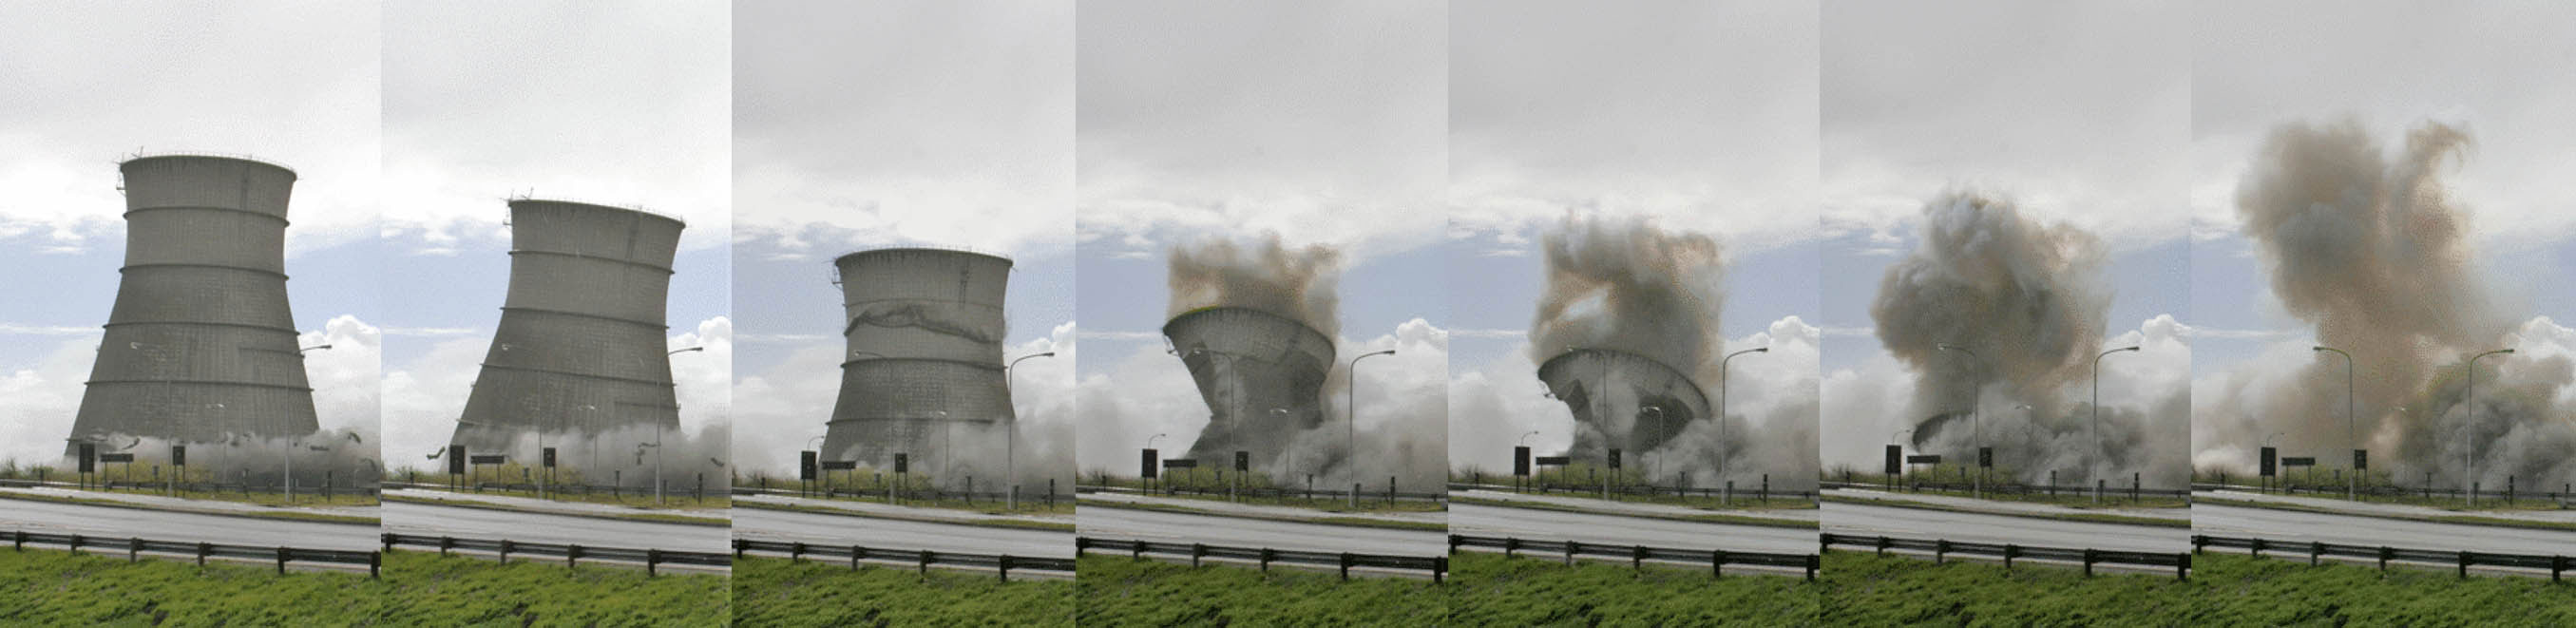 A demolition of coal-fired power station in Athlone, Cape Town, South Africa.